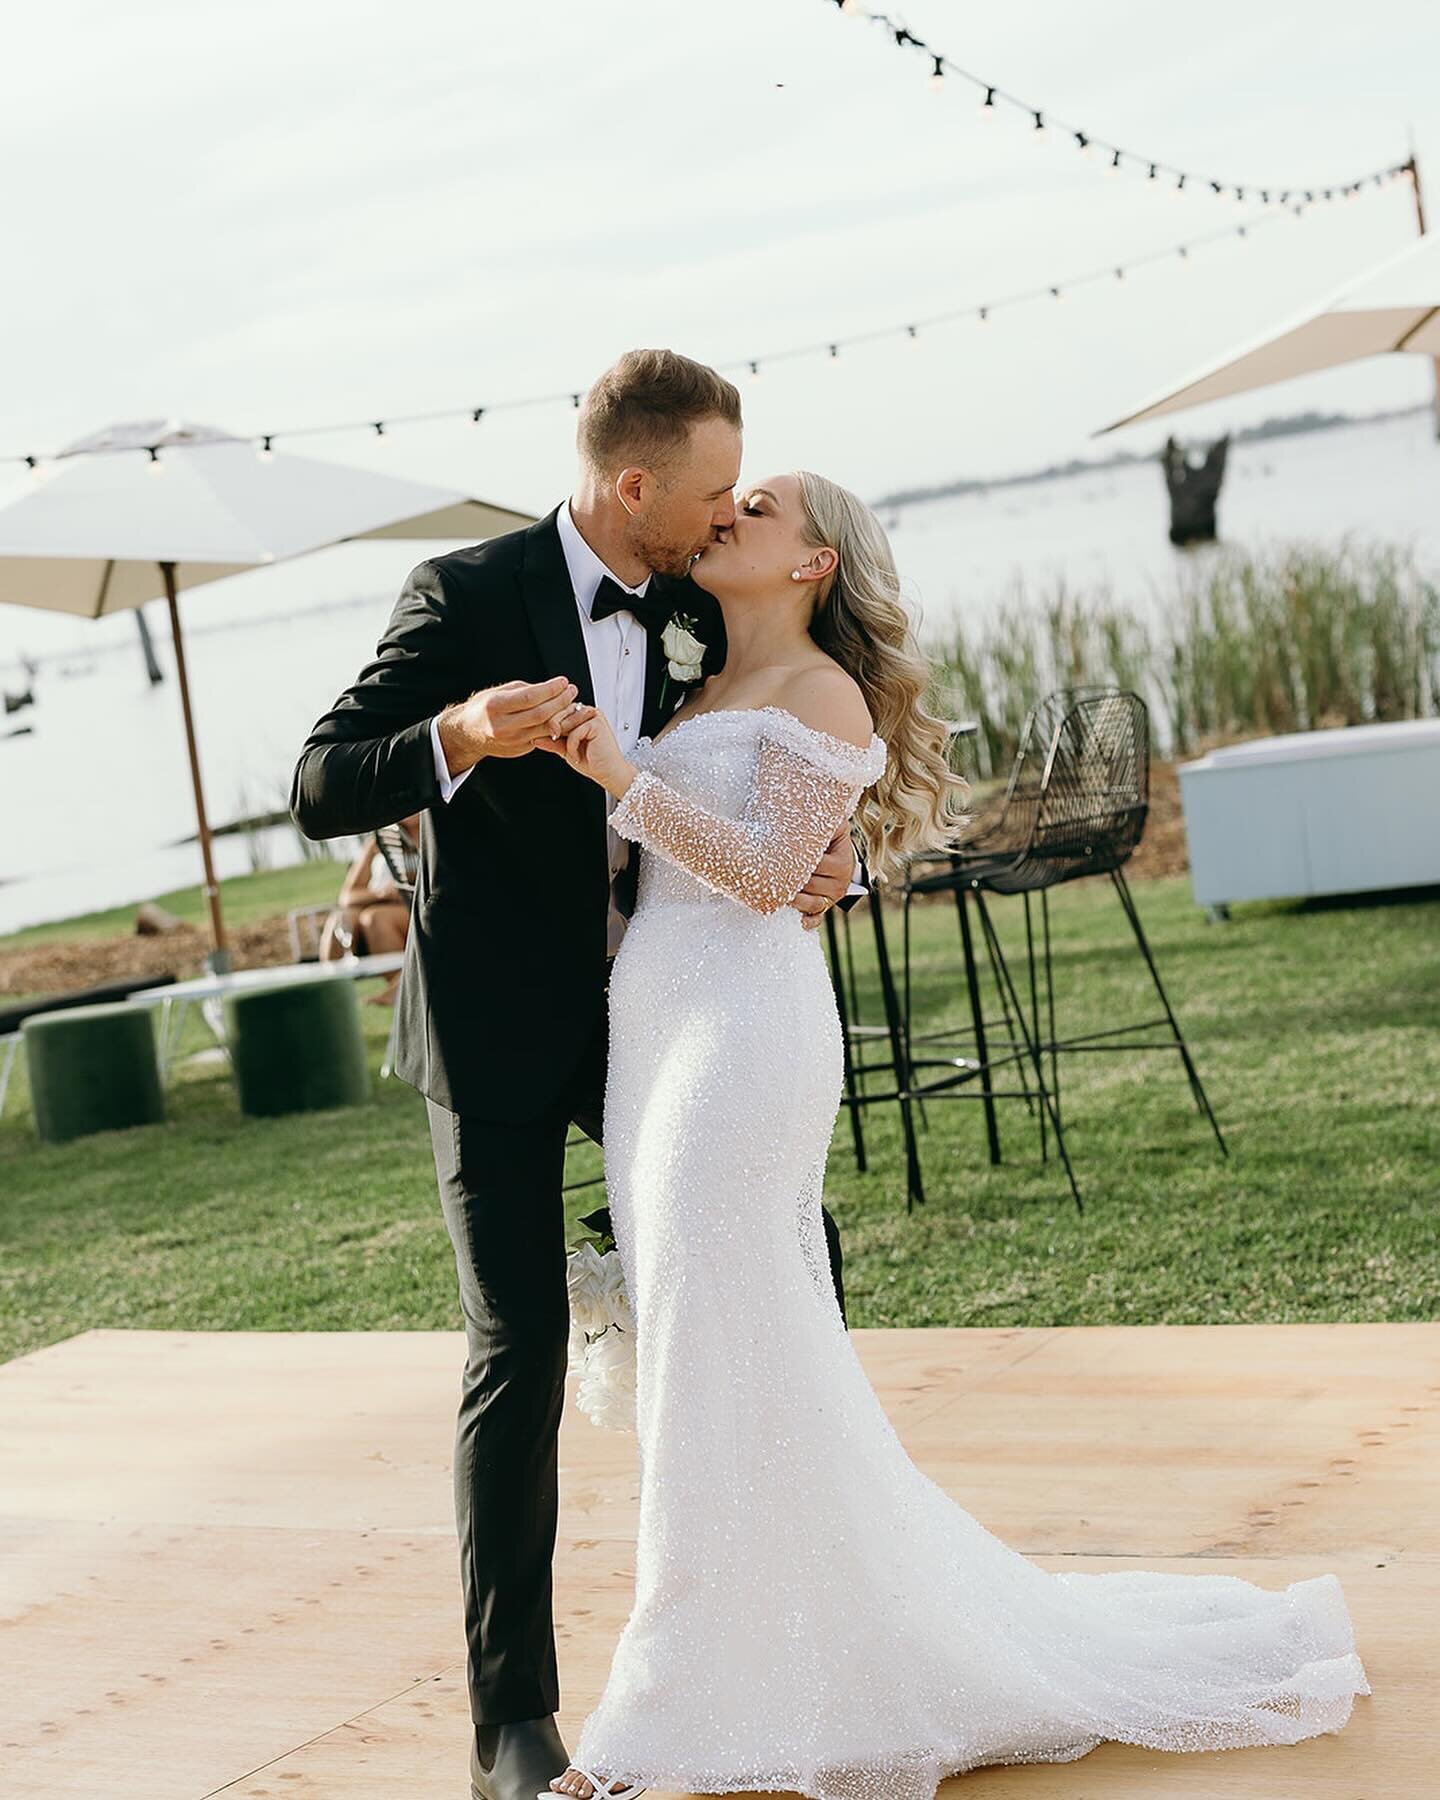 Celebrating the Clarkes 🤍

Photo @jessicasimphotography 
Video @sommarfilms 
Dress @marquisebridal 
Furniture and coordination @bangeventco 
Marquee and chairs @bourkehire 
Band @larkmusic 
Food @thecookandco 
Drinks @jacyees 
Hair @blondie.hair_yar